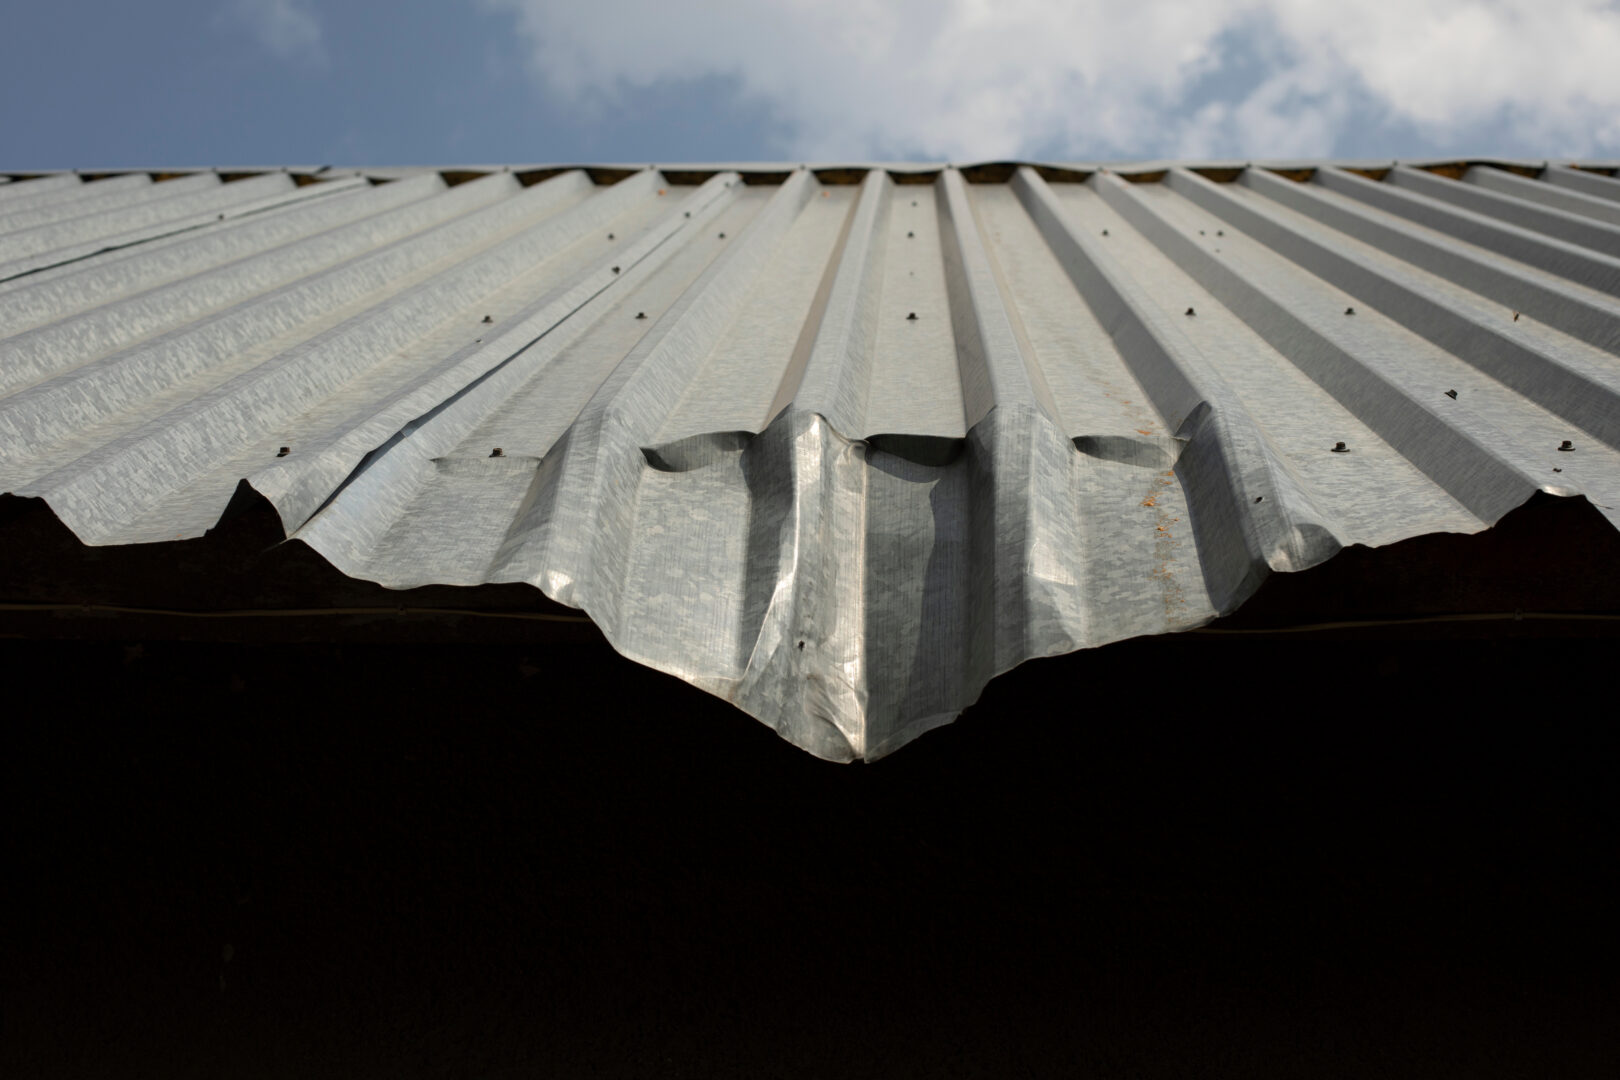 Wind damaged metal roof with a bent edge